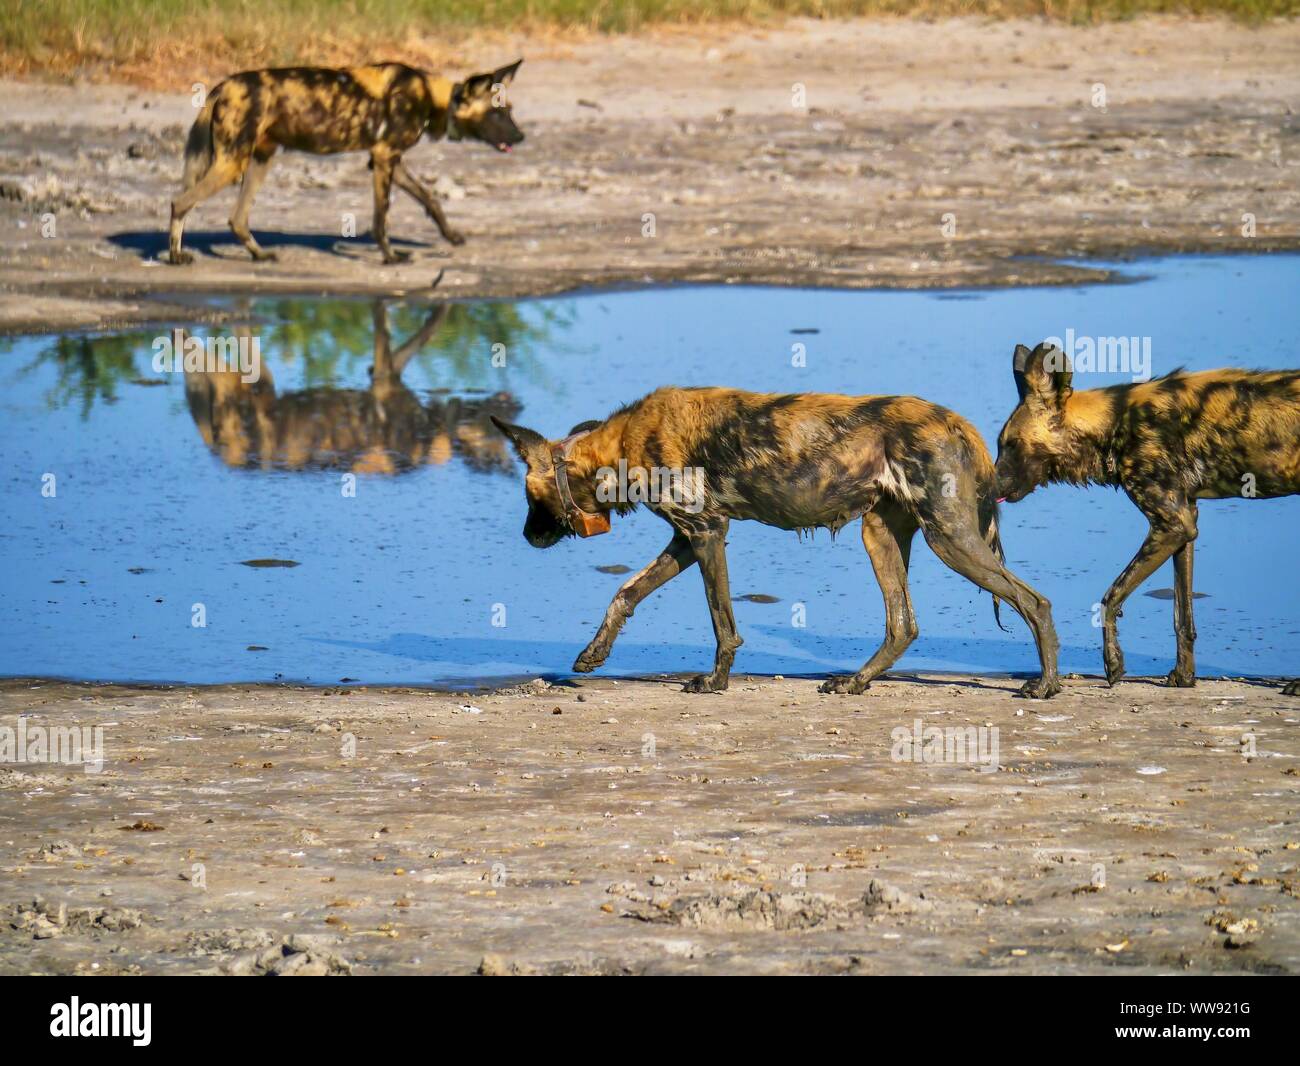 Three African Wild Dogs (Latin - Lycaon pictus) at a waterhole in Botswana. They are wearing tracking collars to monitor their behavior and migration. Stock Photo